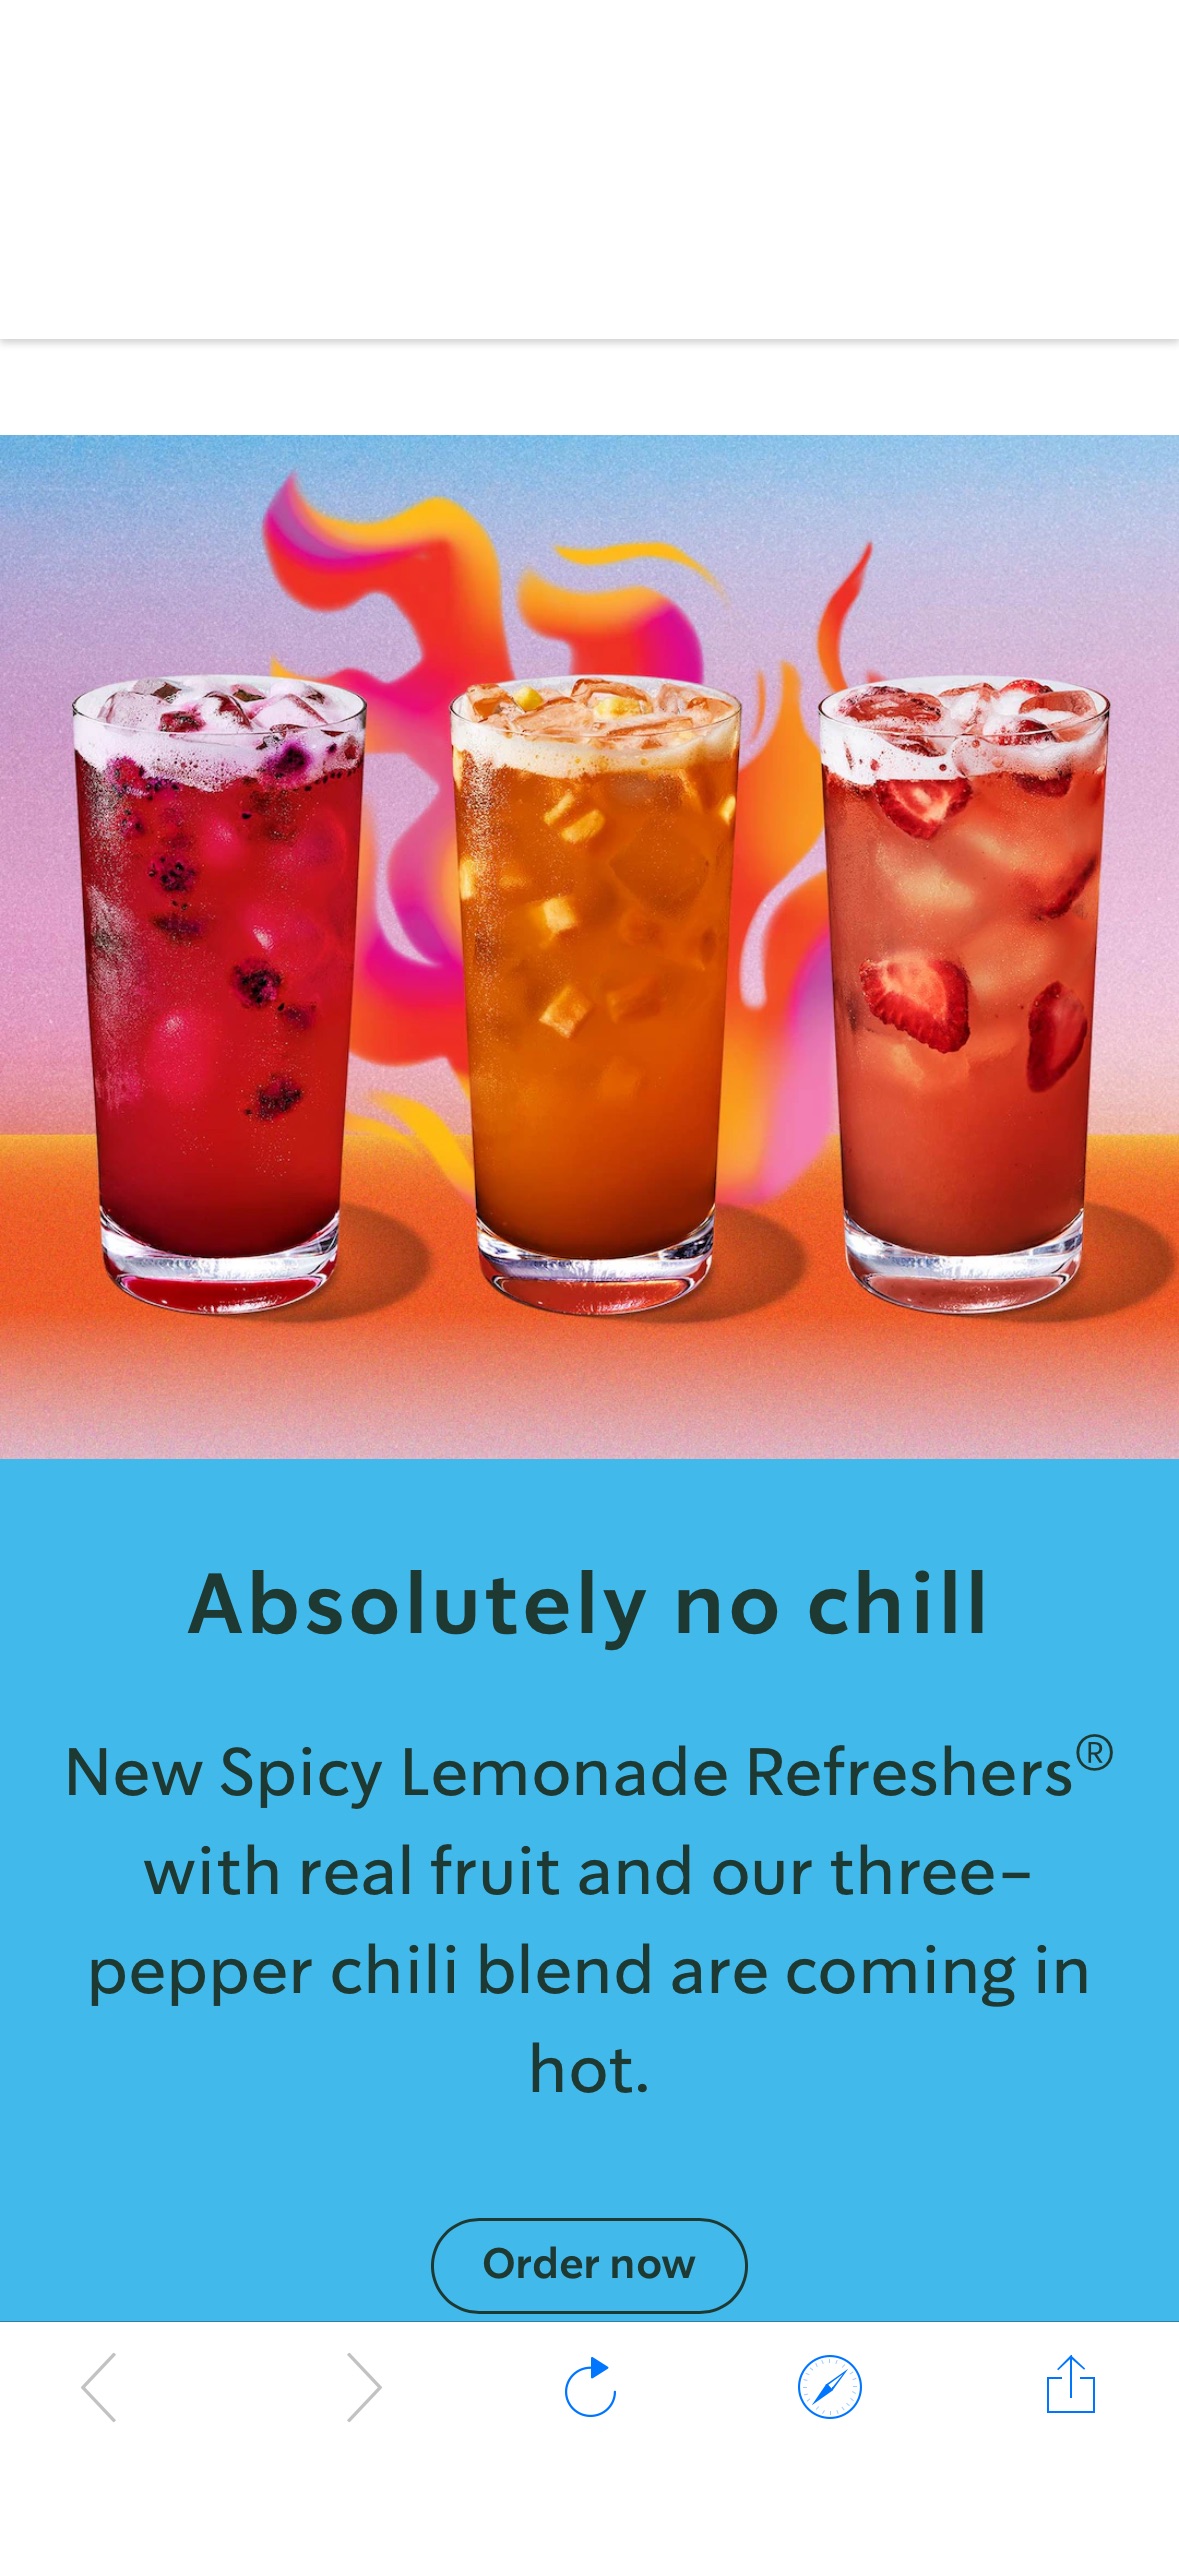 New Spicy Lemonade Refreshers® with real fruit and our three-pepper chili blend are coming in hot.